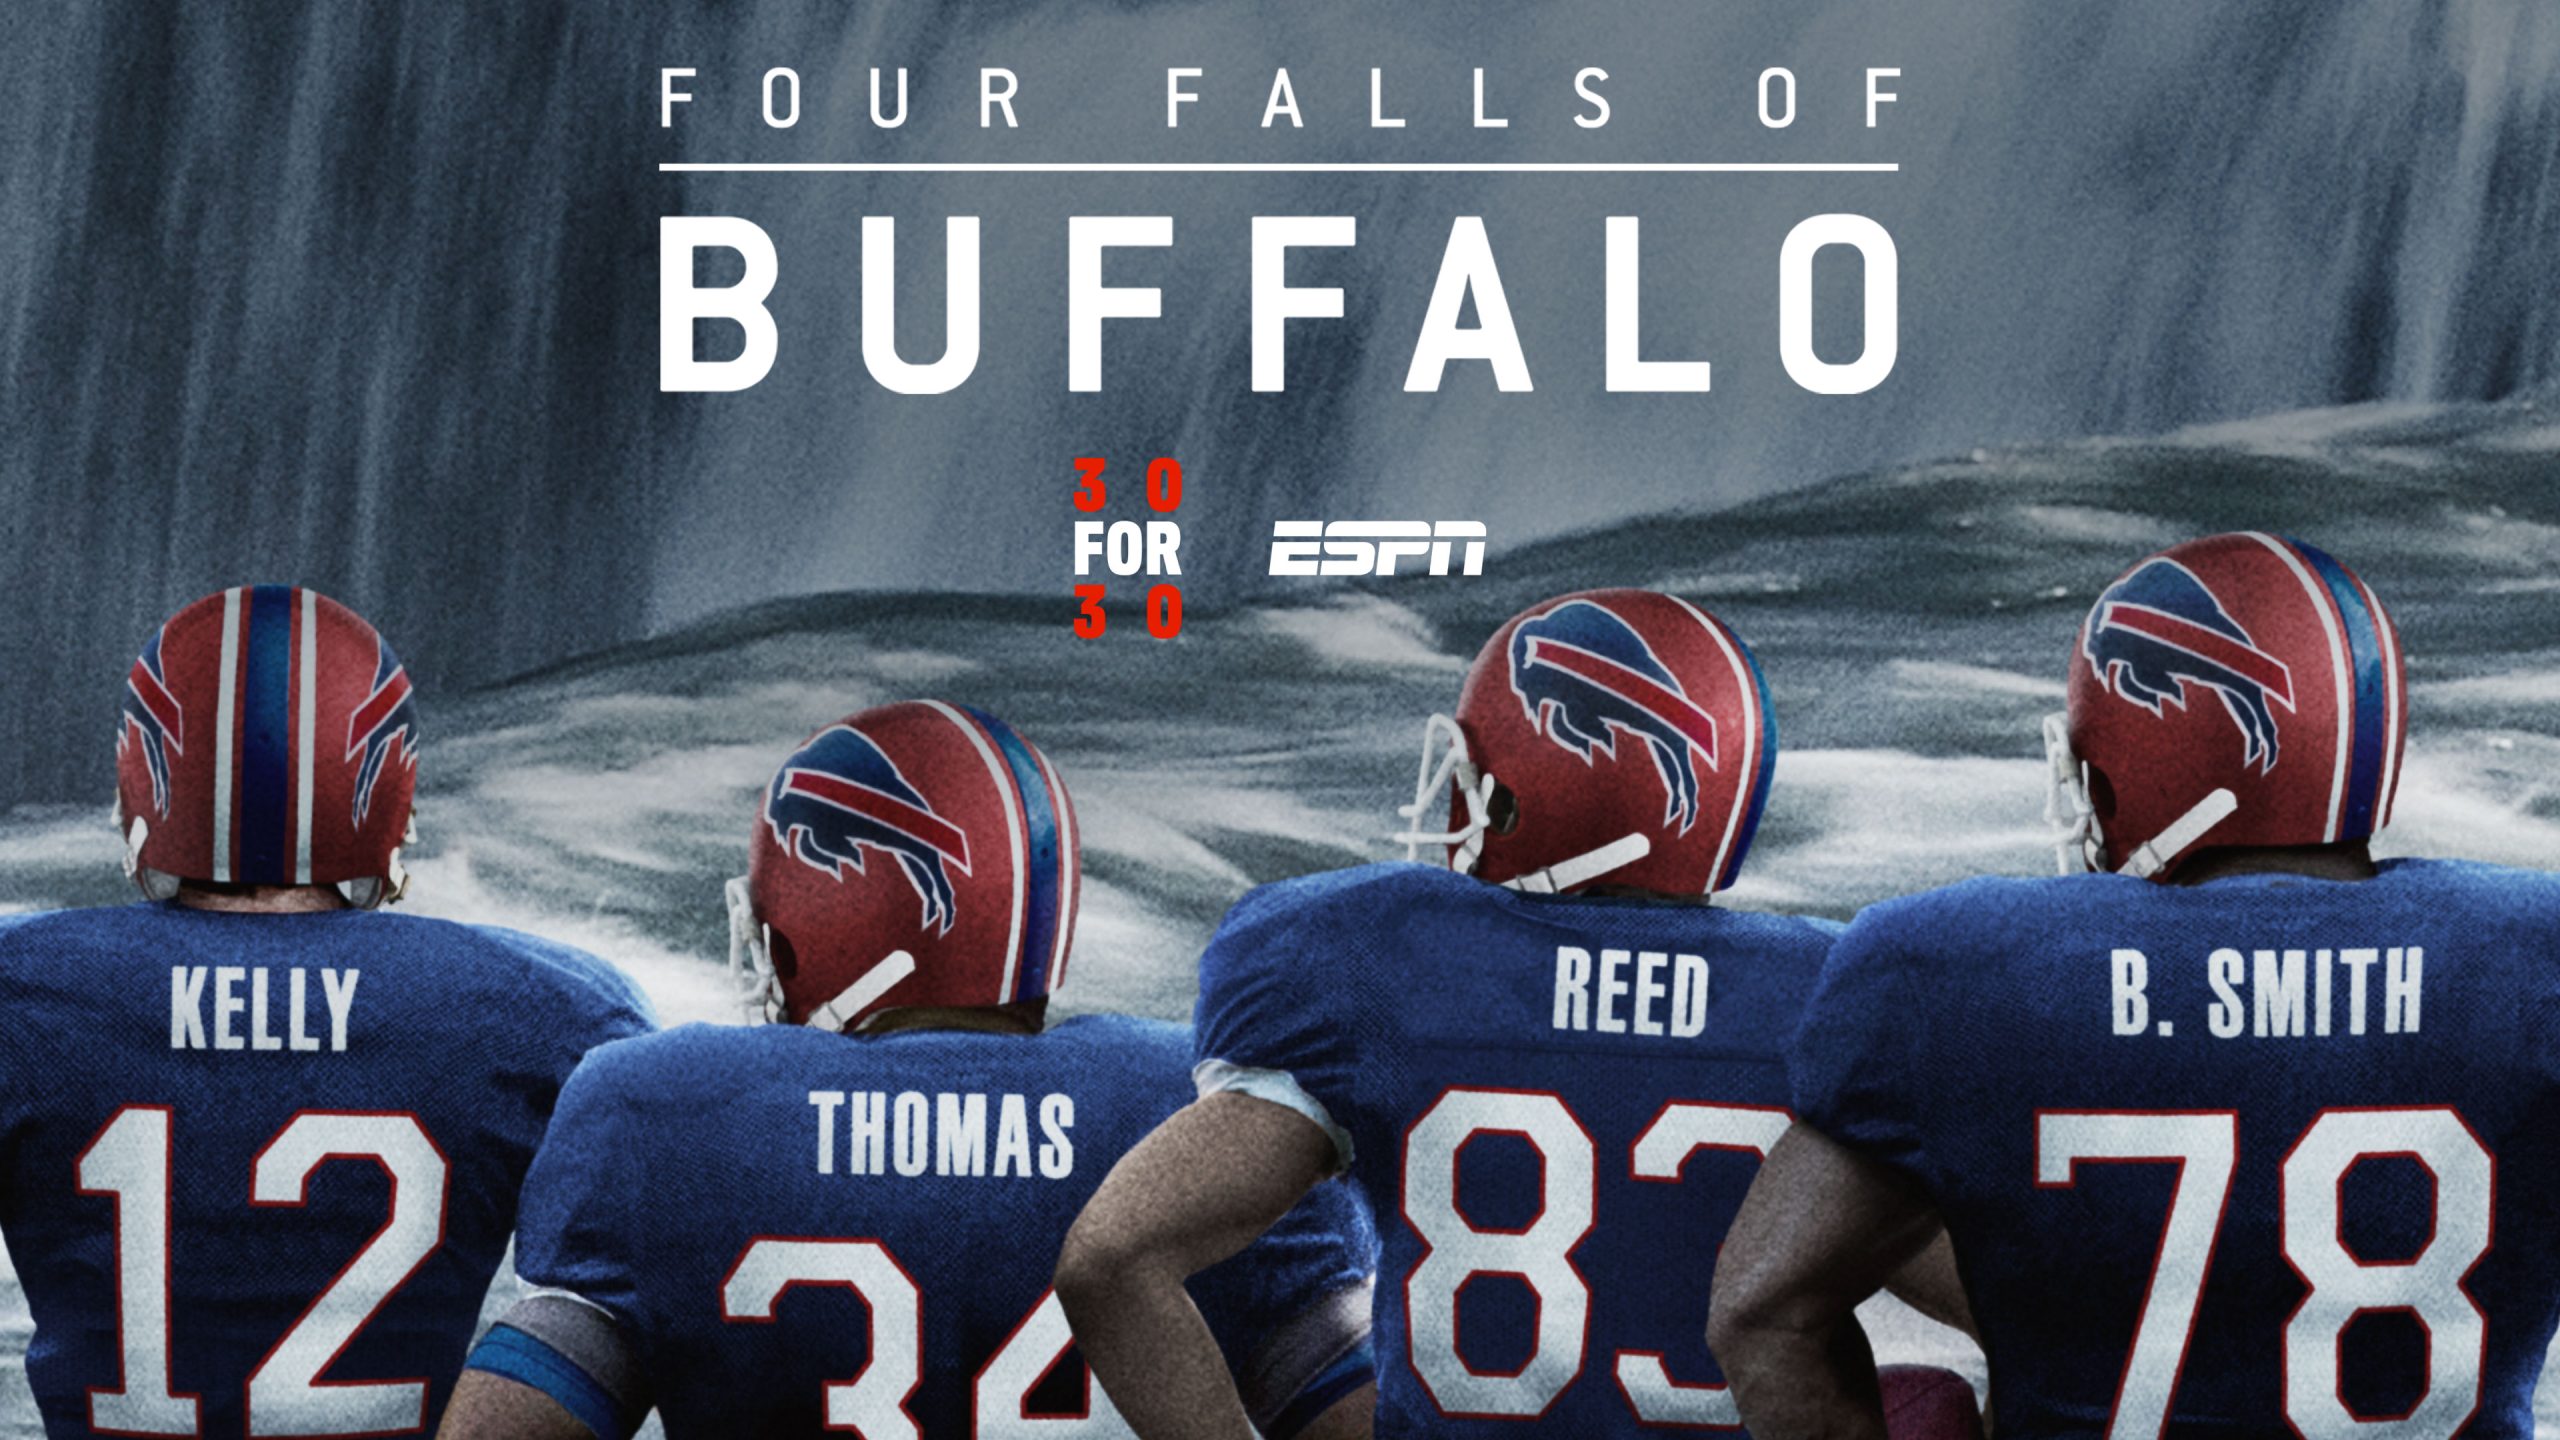 NEWS 3 New Football Documentaries are Coming to Disney+! the disney food blog